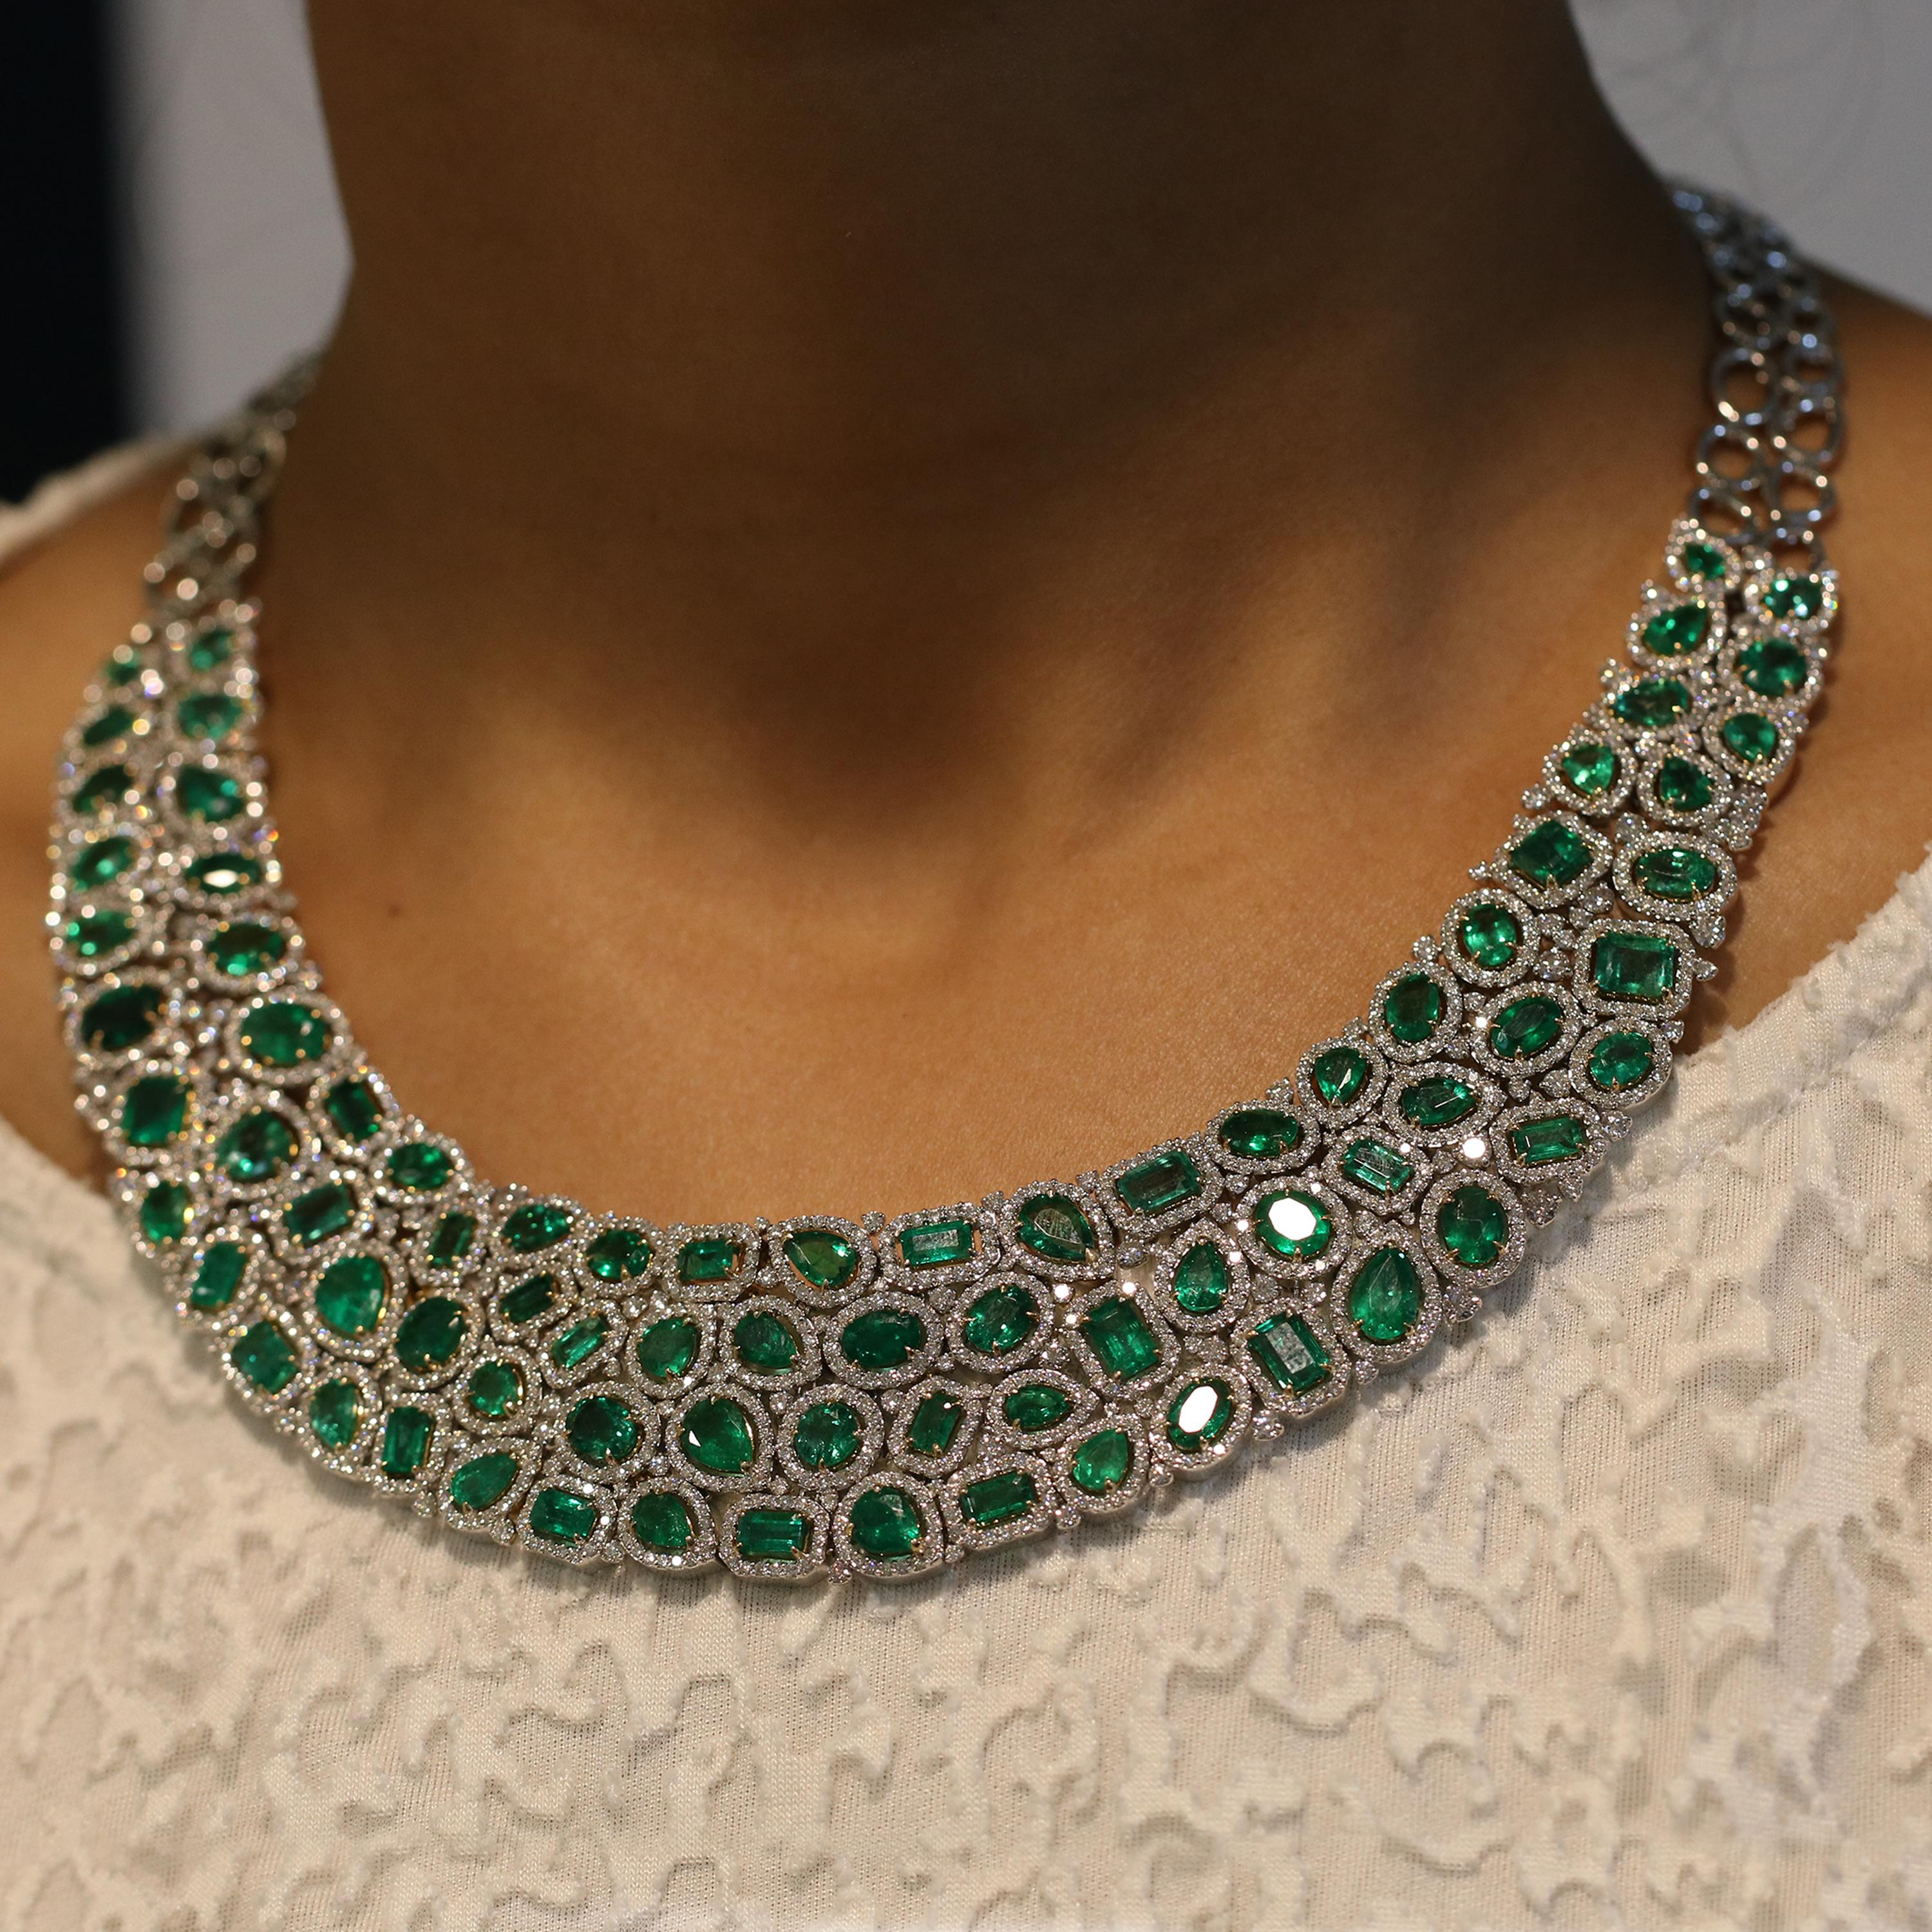 Gross Weight: 119.0 Grams
Diamond Weight: 17.11 Carats
Emerald Weight: 34.74 Carats
Currently Not Graded. IGI Certification can be done on request.

Video of the Necklace can be shared on request.

A resplendent design that's bound to make head